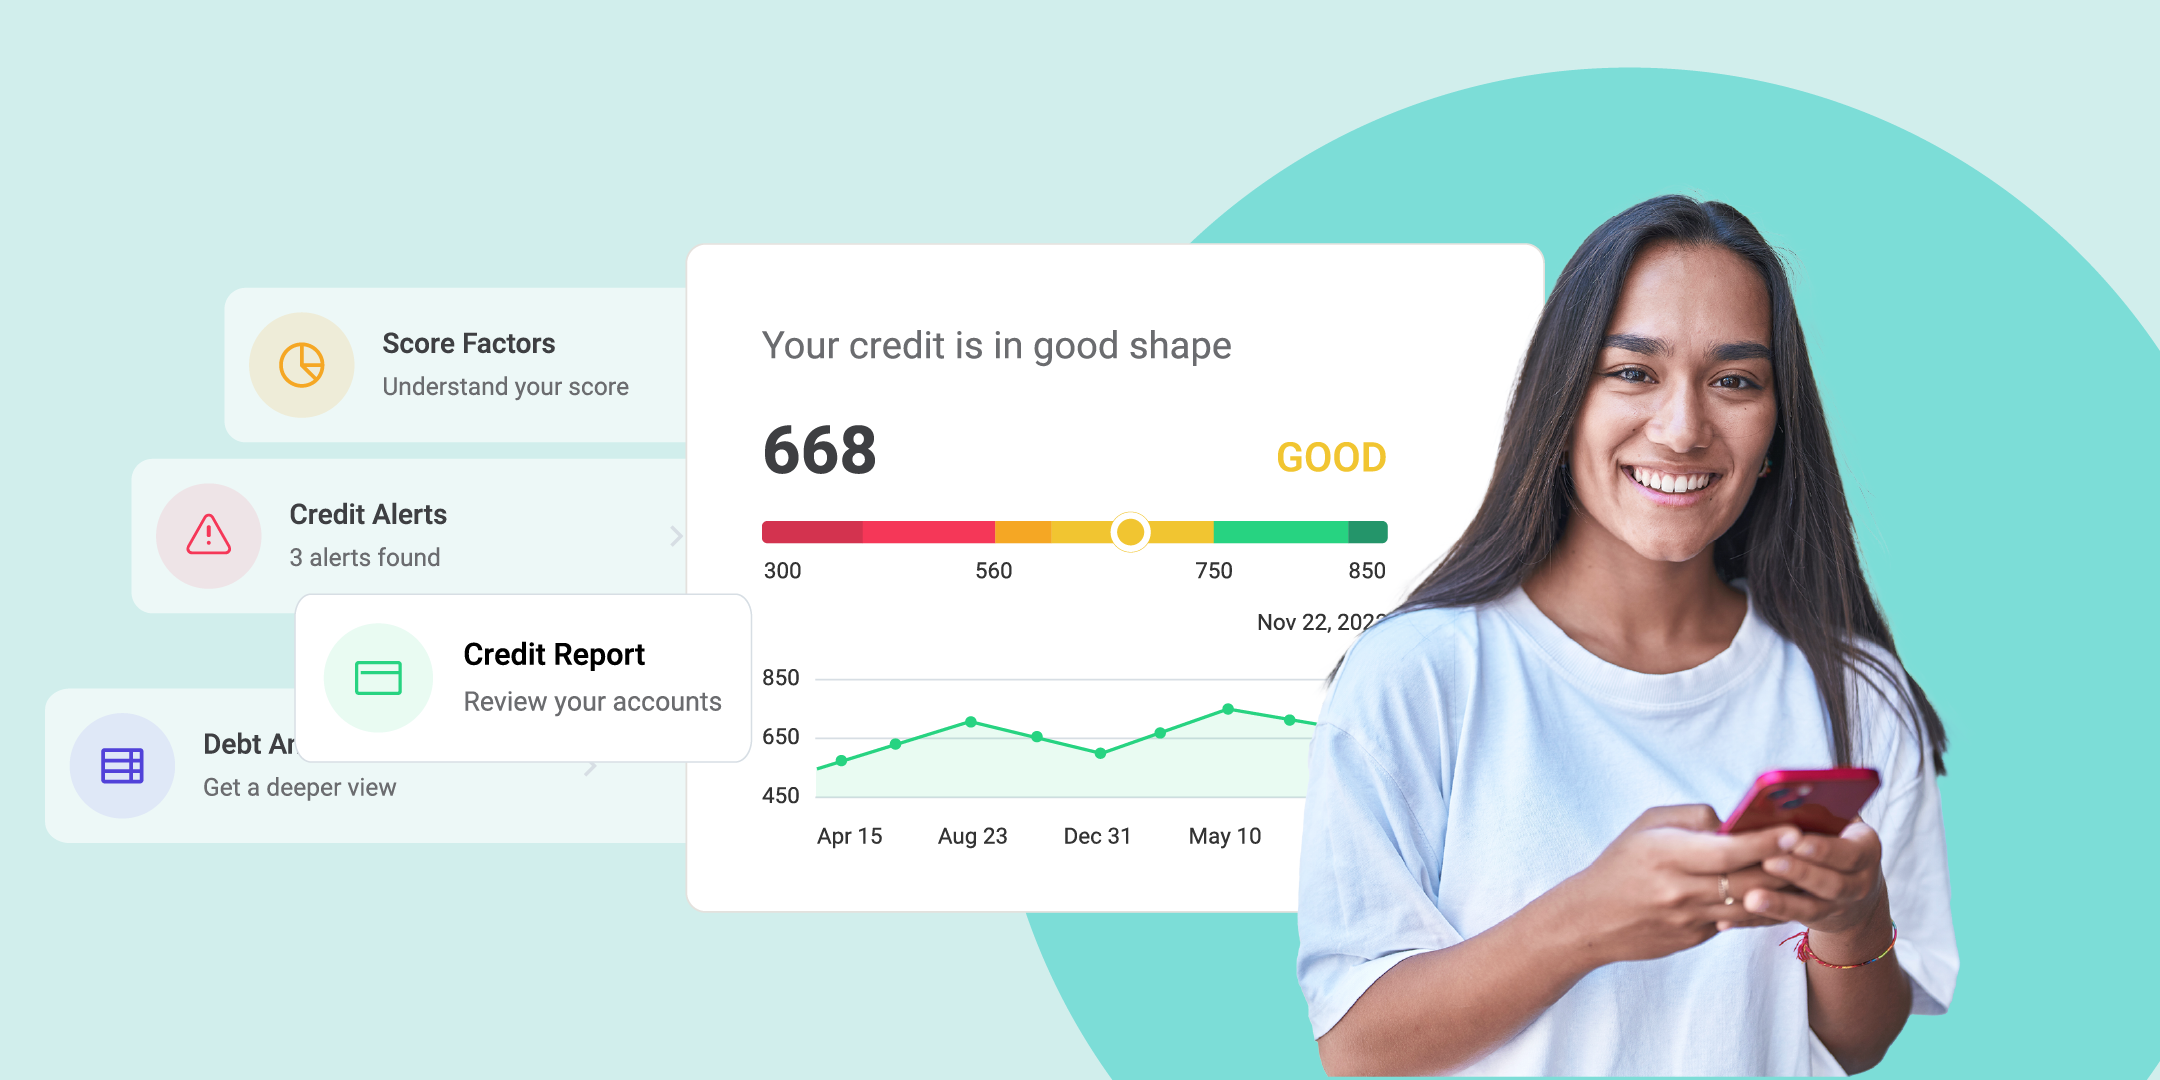 A smiling woman with a mobile phone in her hand is surrounded by her credit score and other credit attributes